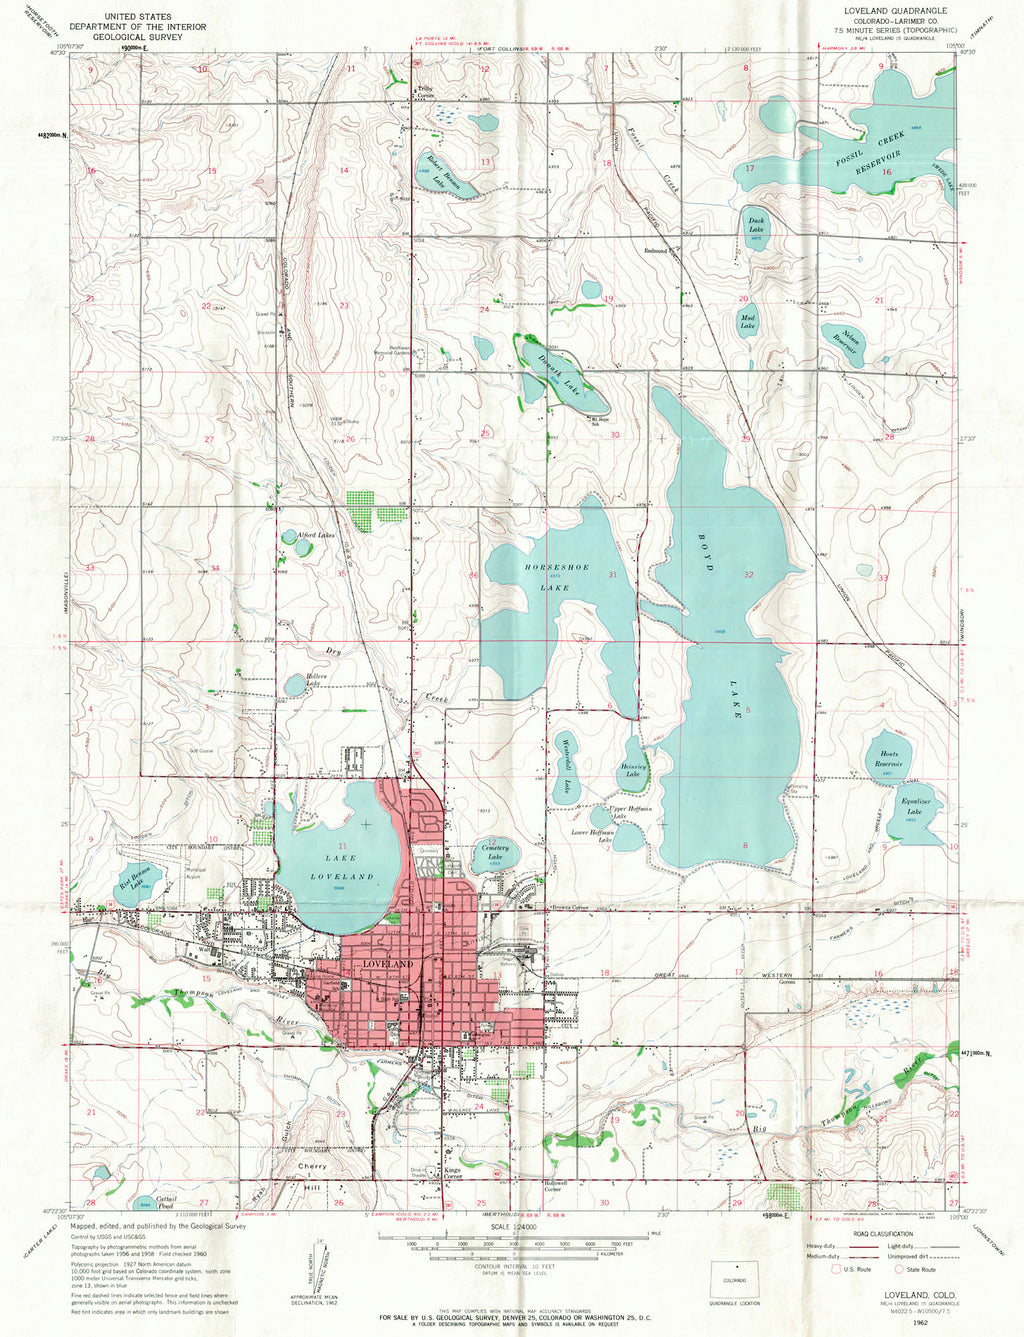 (CO.- Loveland) Loveland Quadrangle, 1962 A great reference for the town, including the numerous nearby lakes. spans from Kings Corner, up to Tilby Corner, with detail for terrain, drainages, as well as the roads, railroads and placenames. Does not some buildings. Condition is very good. Image size is approximately  26 x 18.5 (inches) Loveland Colorado